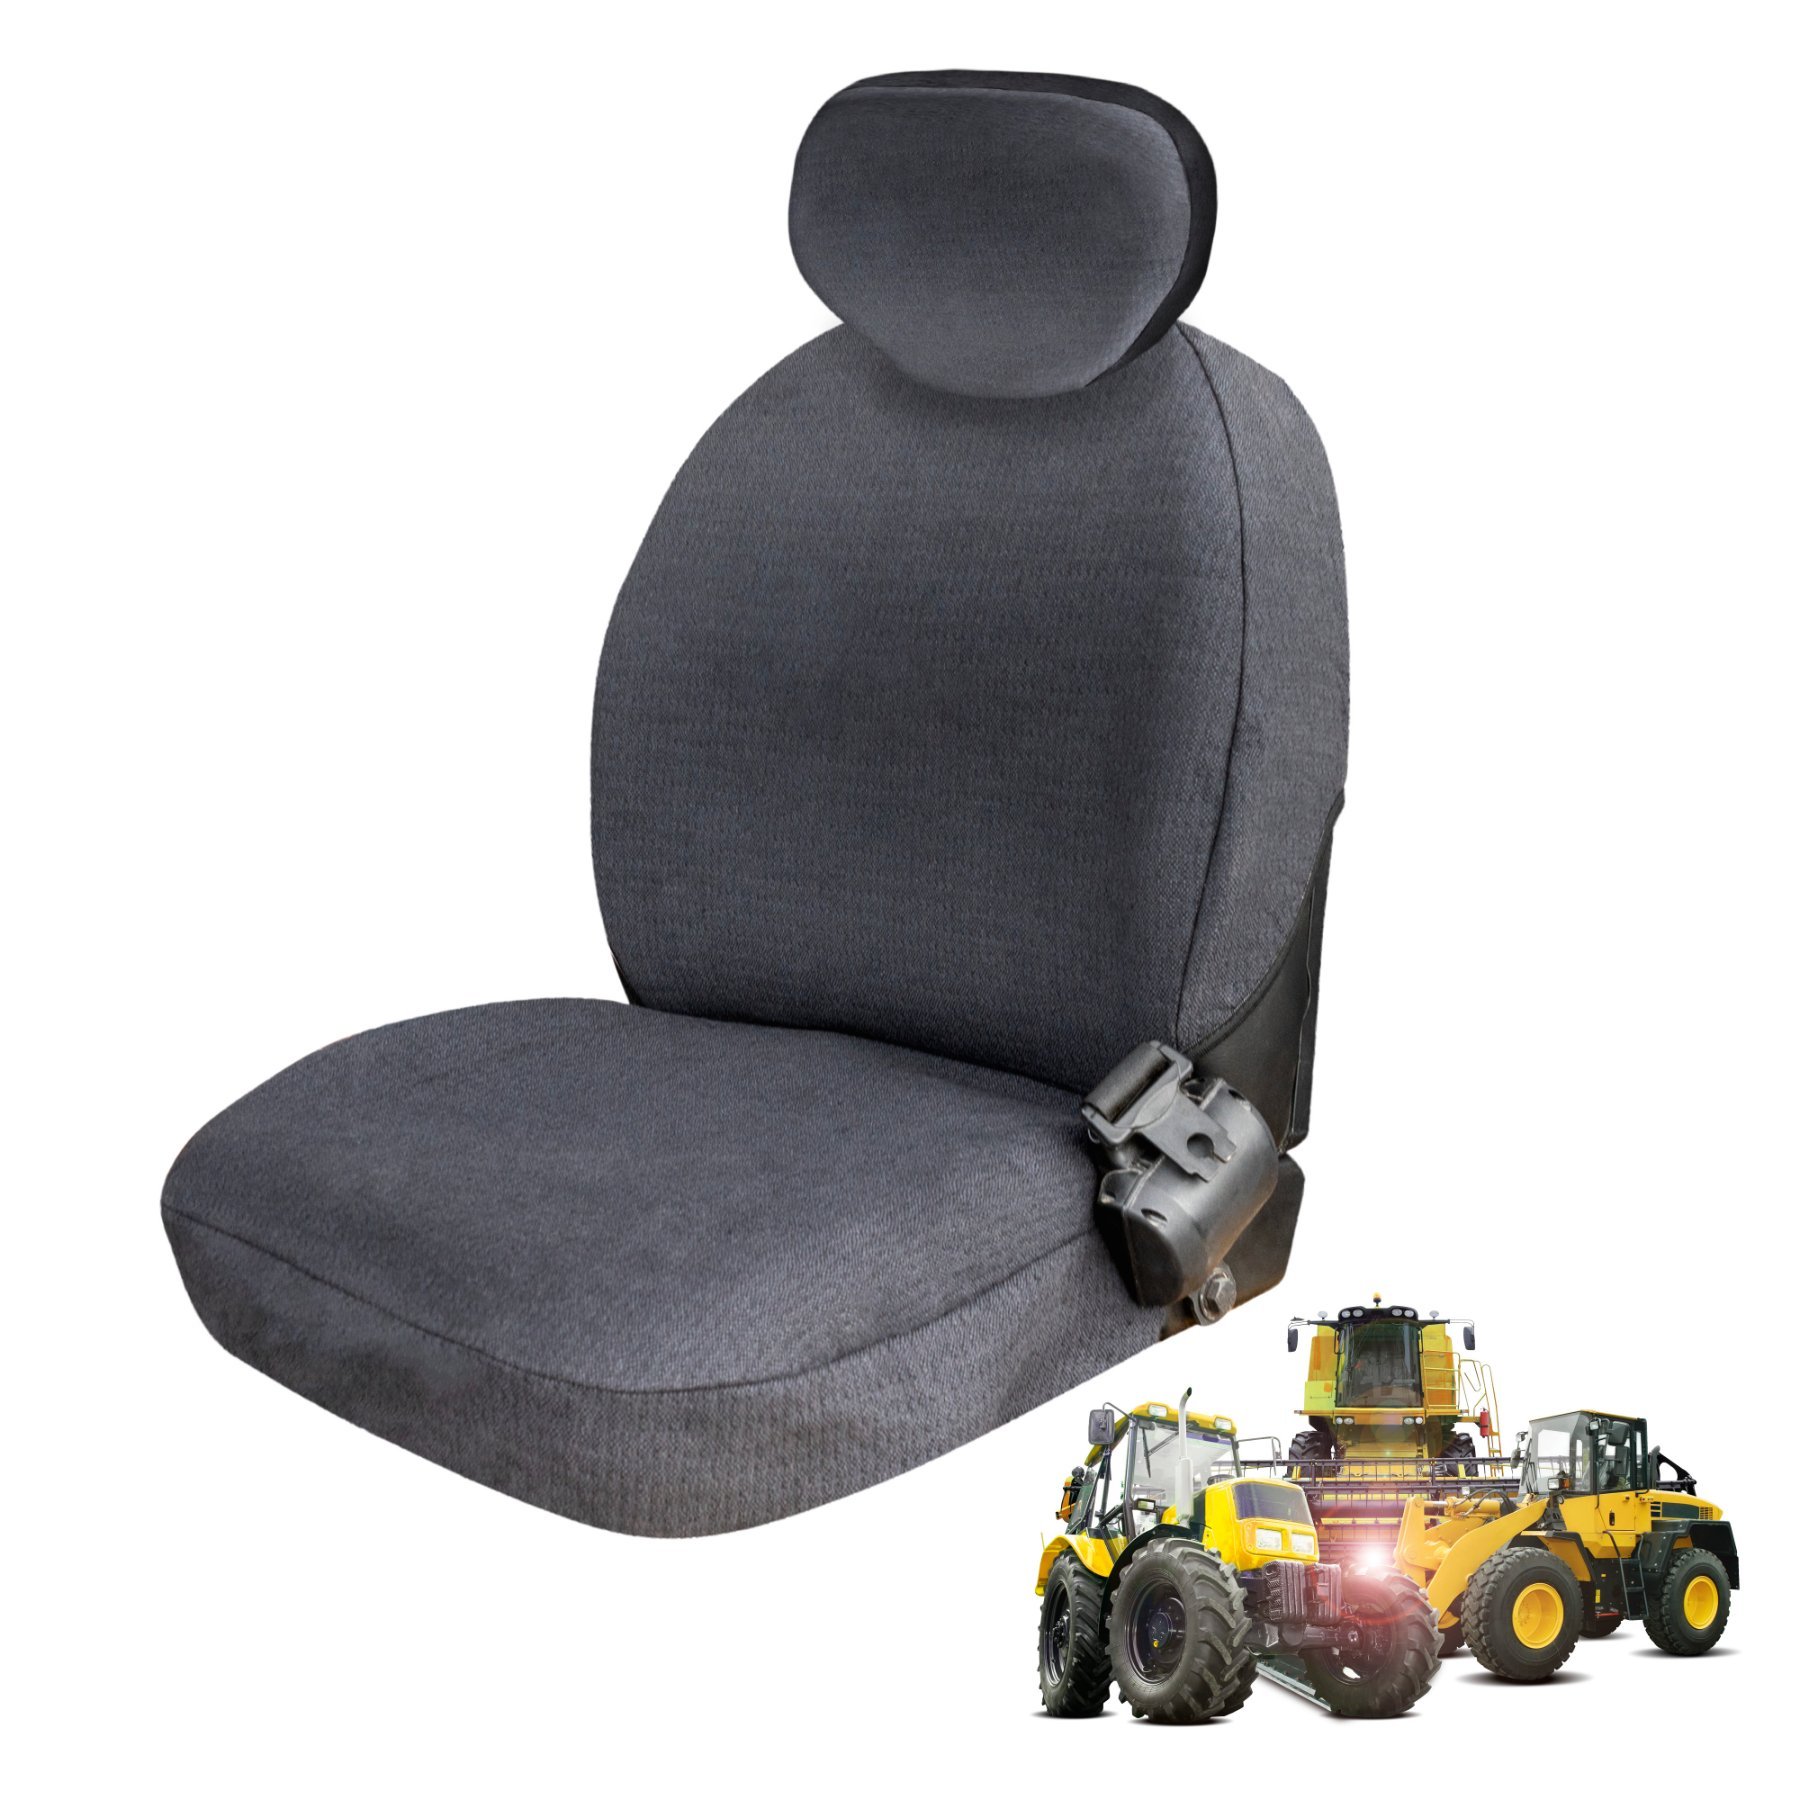 Semi-fit Seat cover for tractors and construction machinery - size 1 with back extension